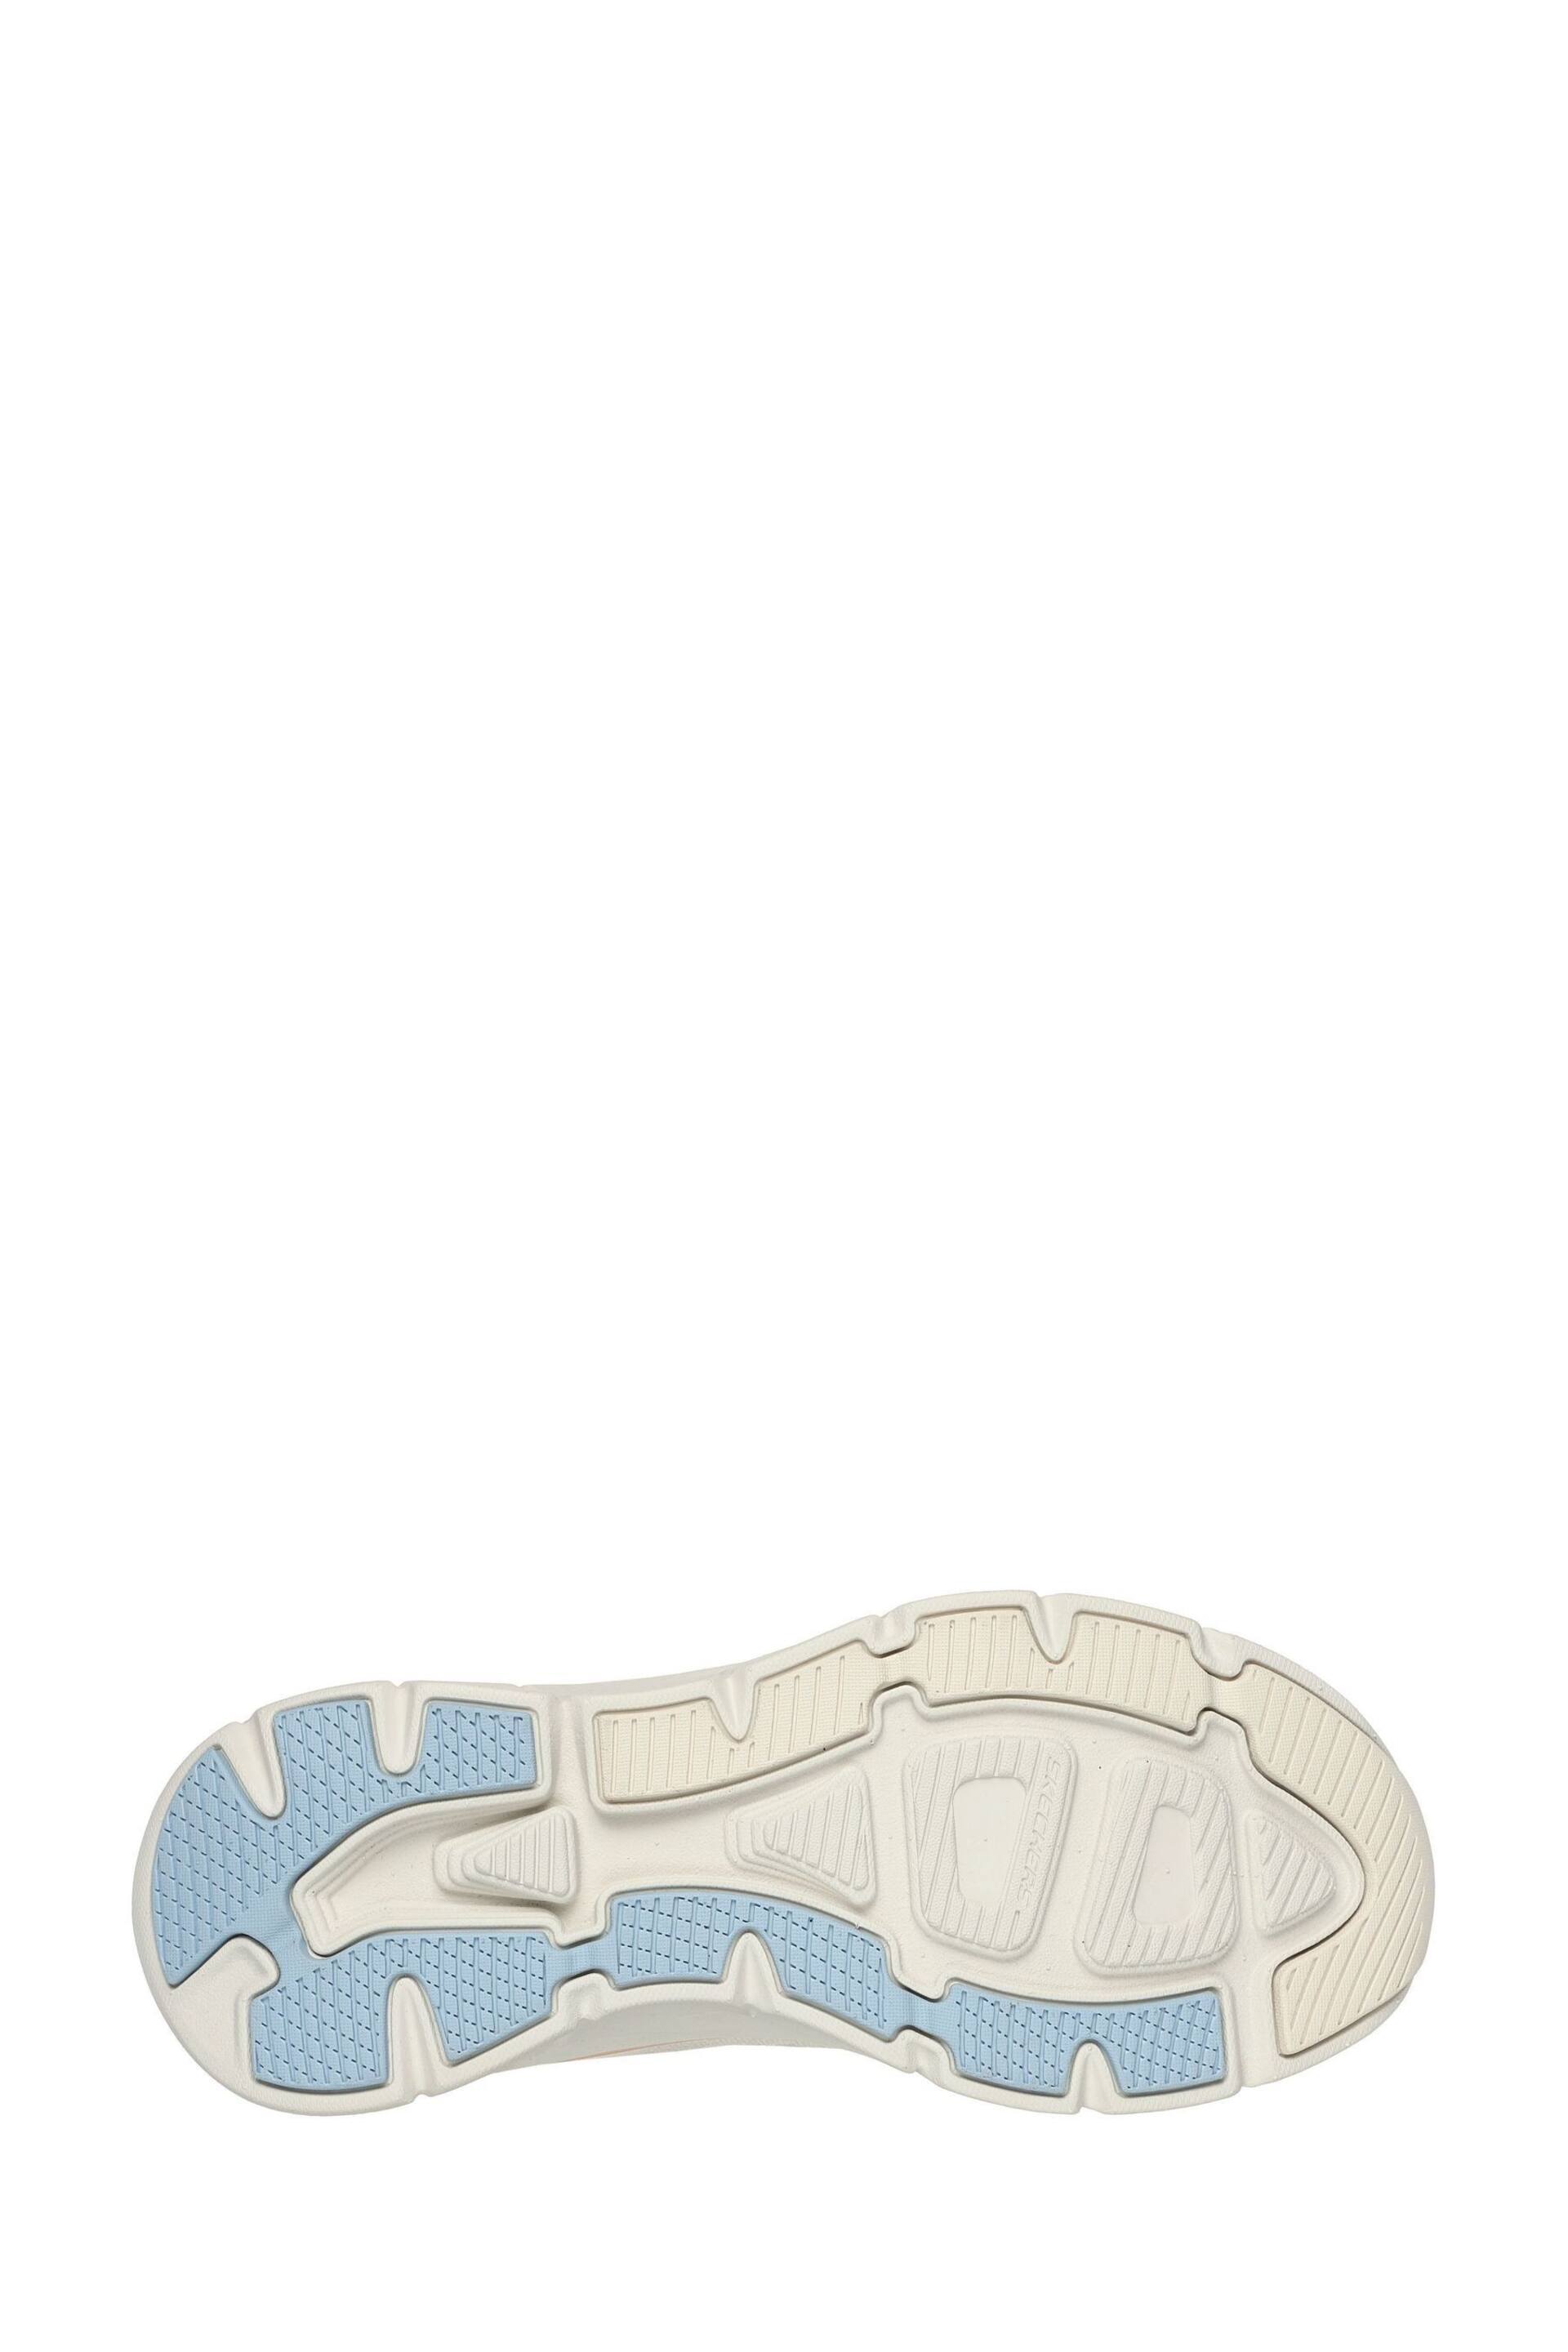 Skechers Natural D’Lux Walker 2.0 Daisy Doll Trainers - Image 5 of 5